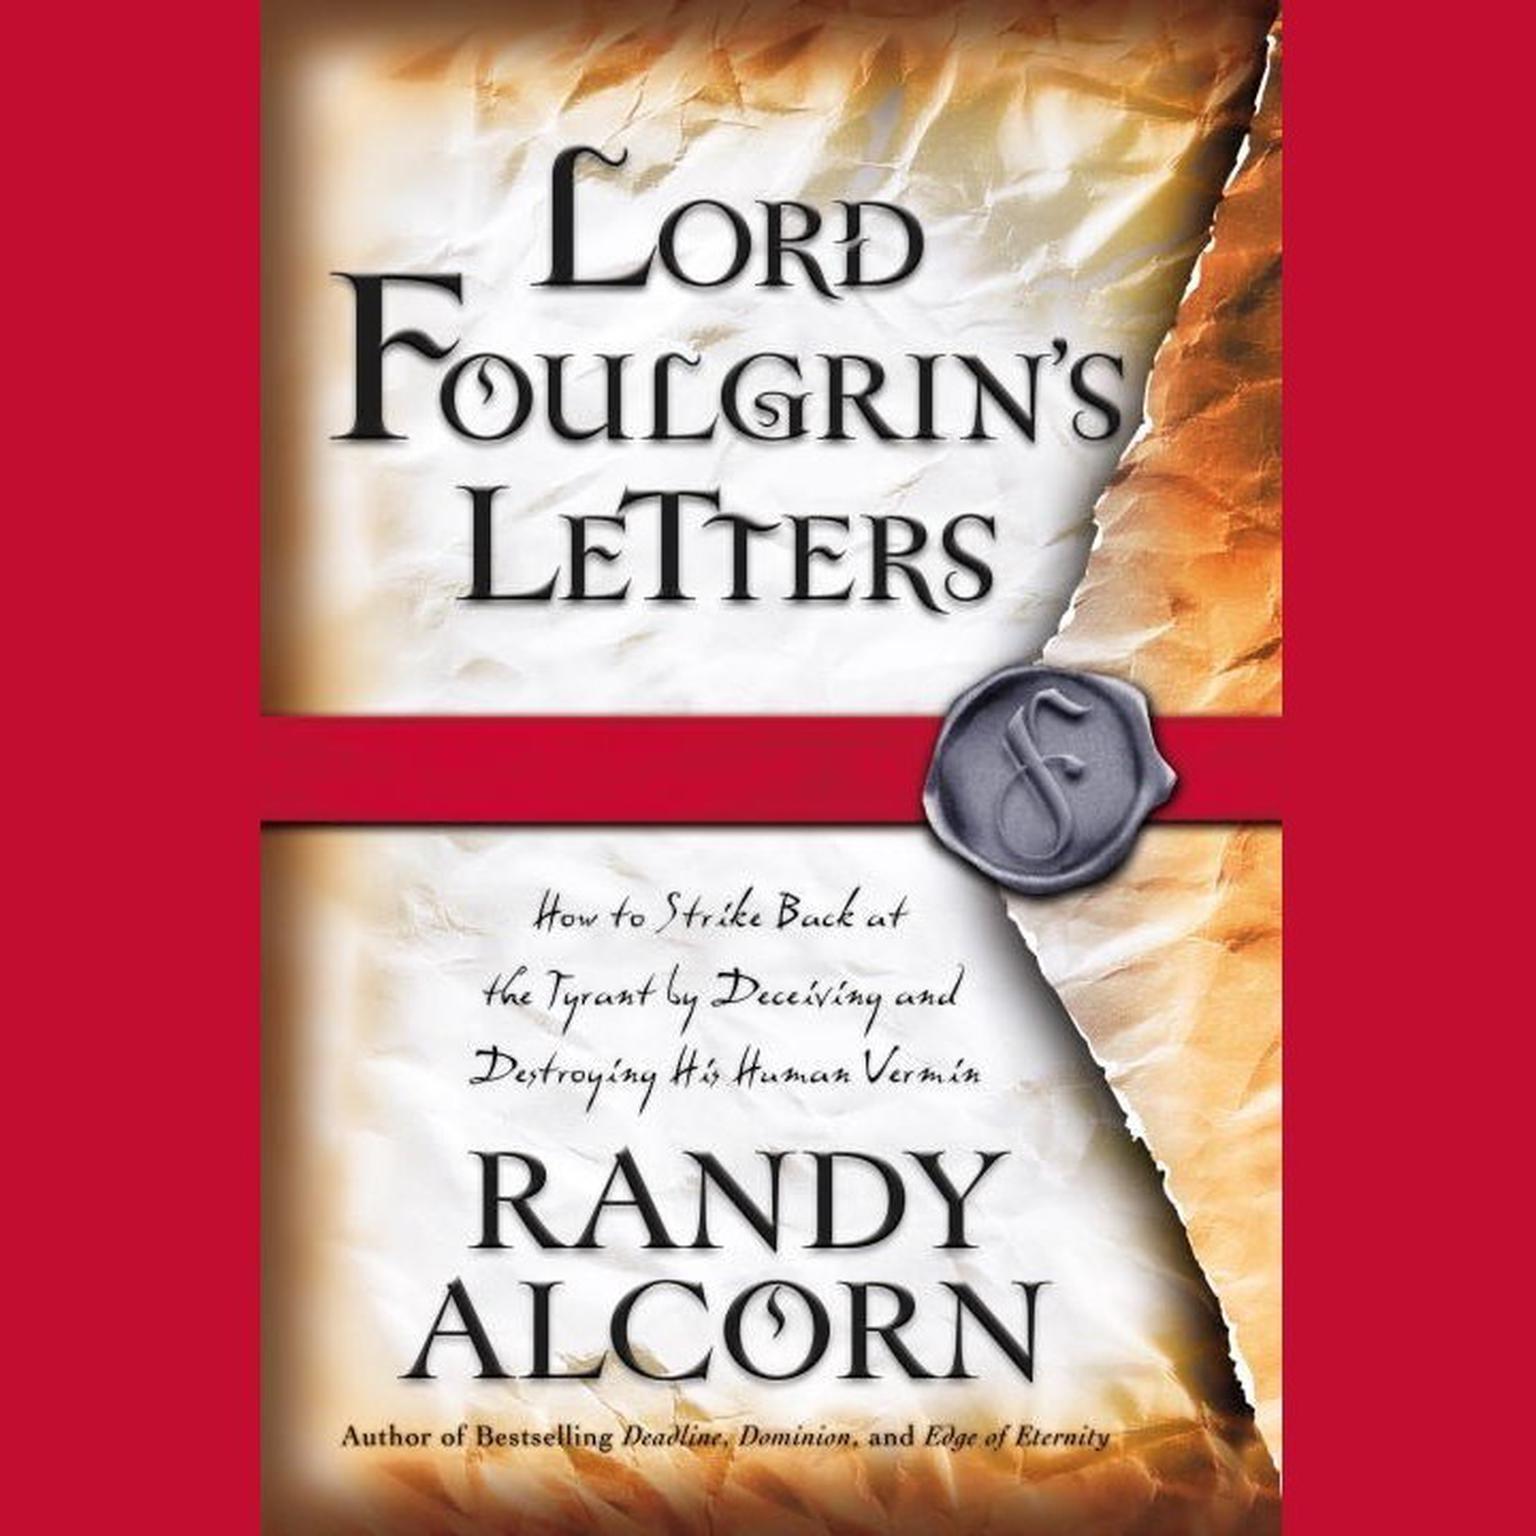 Lord Foulgrins Letters (Abridged): How to Strike Back at the Tyrant by Deceiving and Destroying His Human Vermin Audiobook, by Randy Alcorn